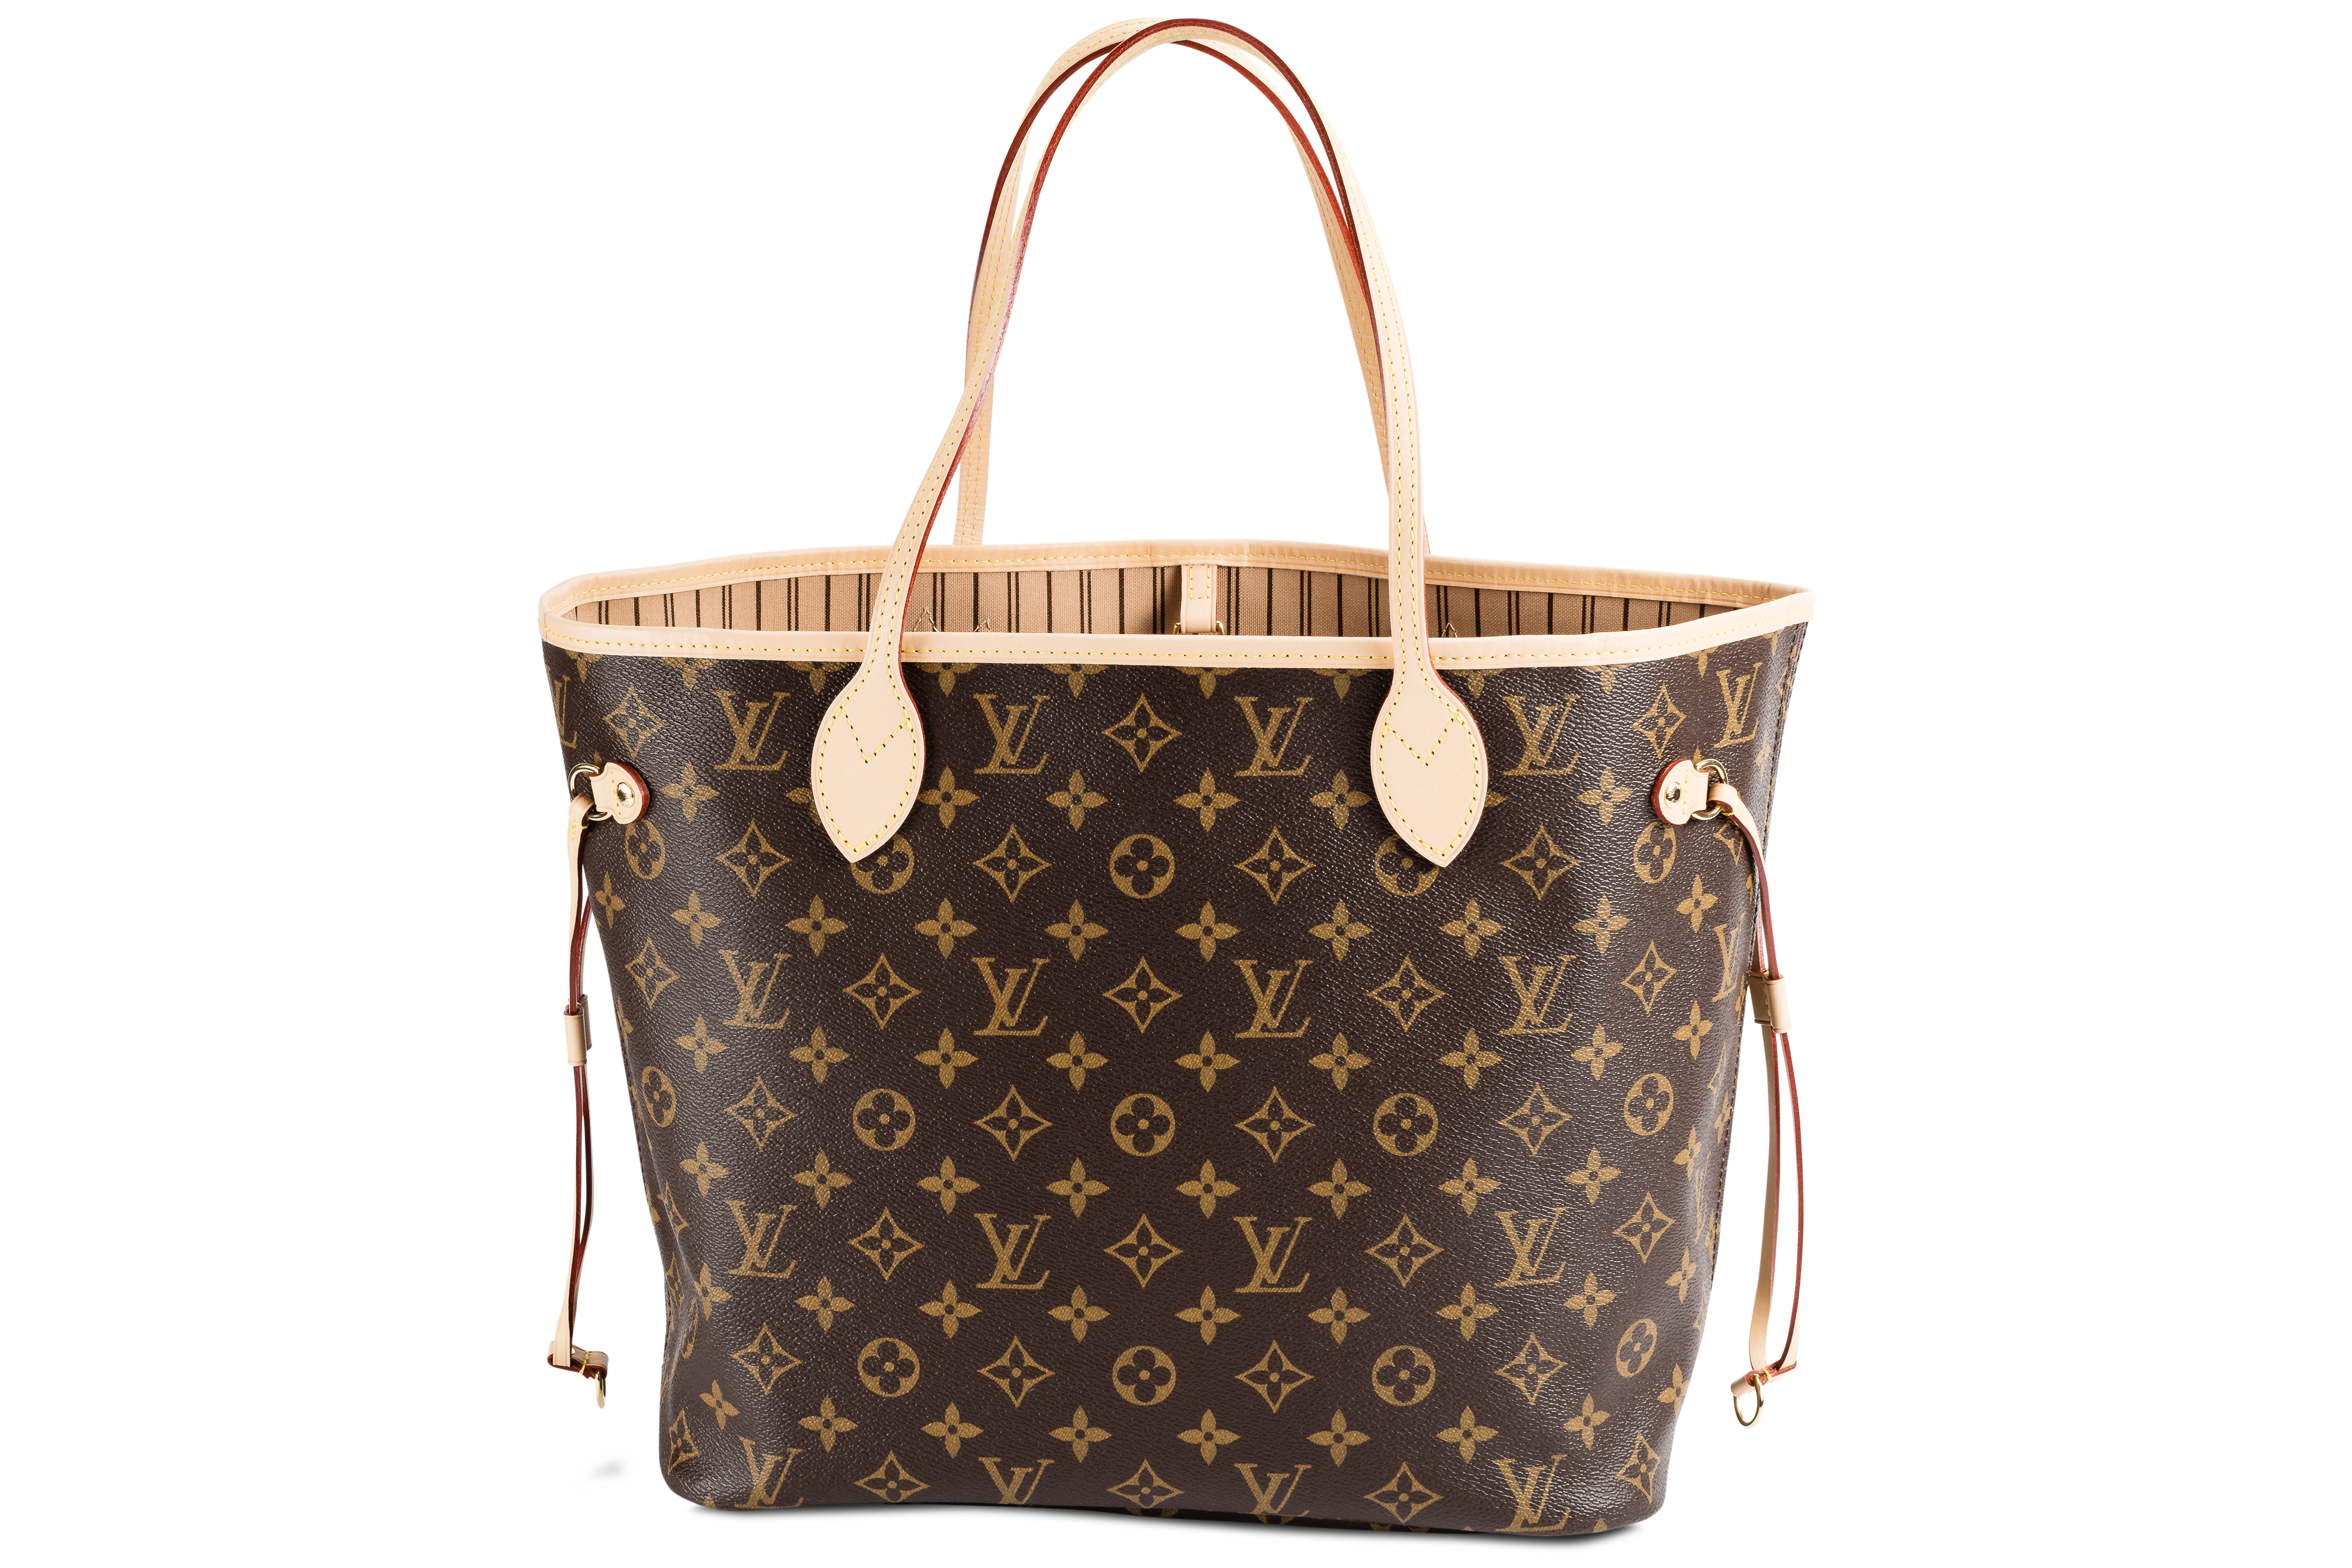 Louis Vuitton Neverfull Sizes Cm | Confederated Tribes of the Umatilla Indian Reservation